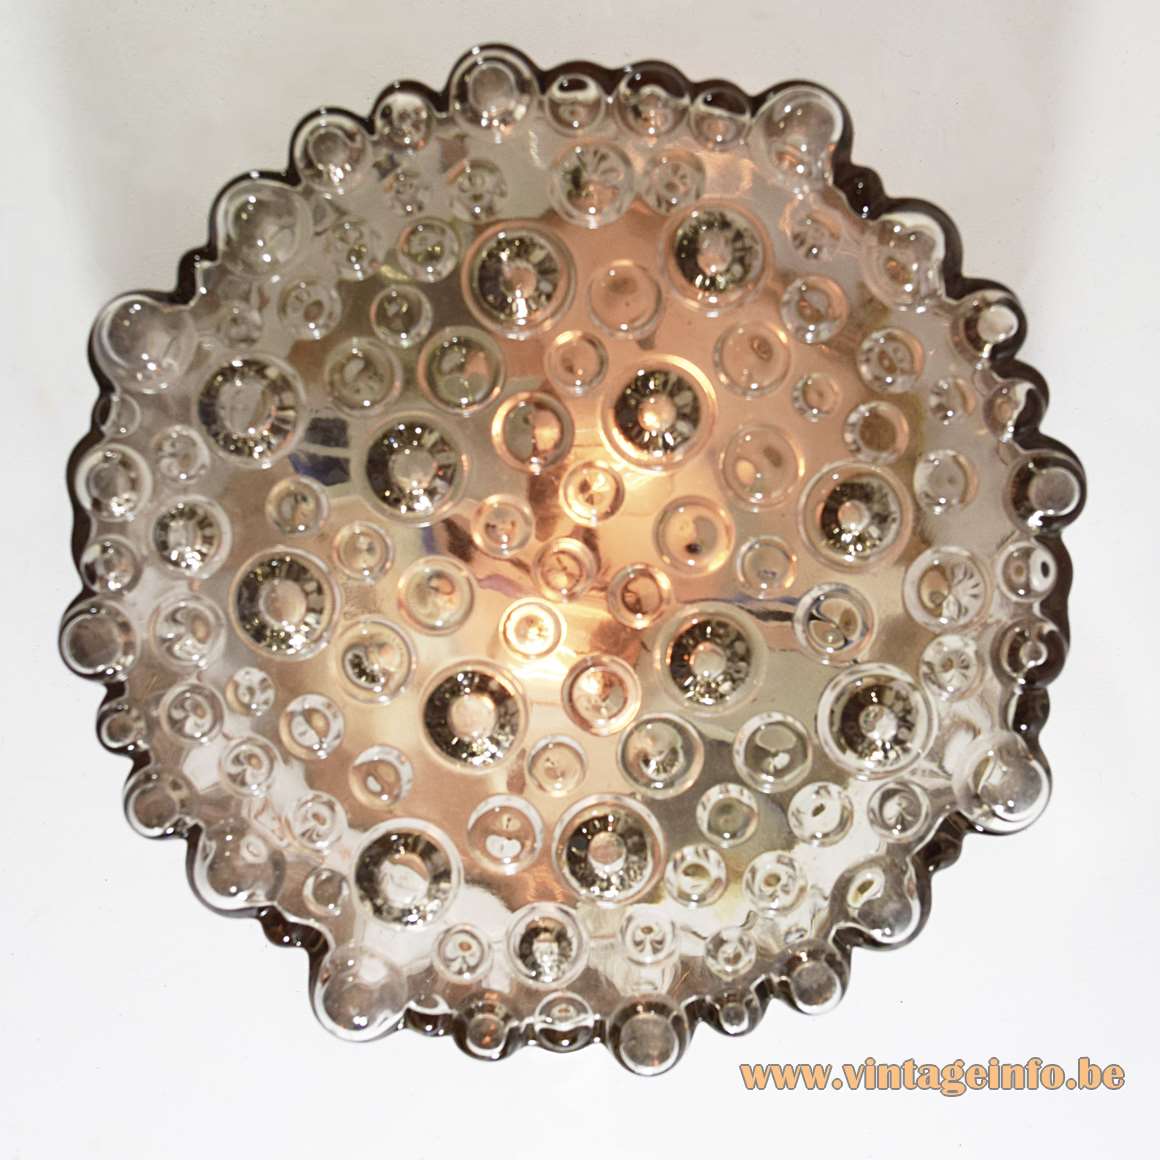 Staff bubble glass flush mount or wall lamp round smoked embossed glass lampshade 1960s 1970s Germany